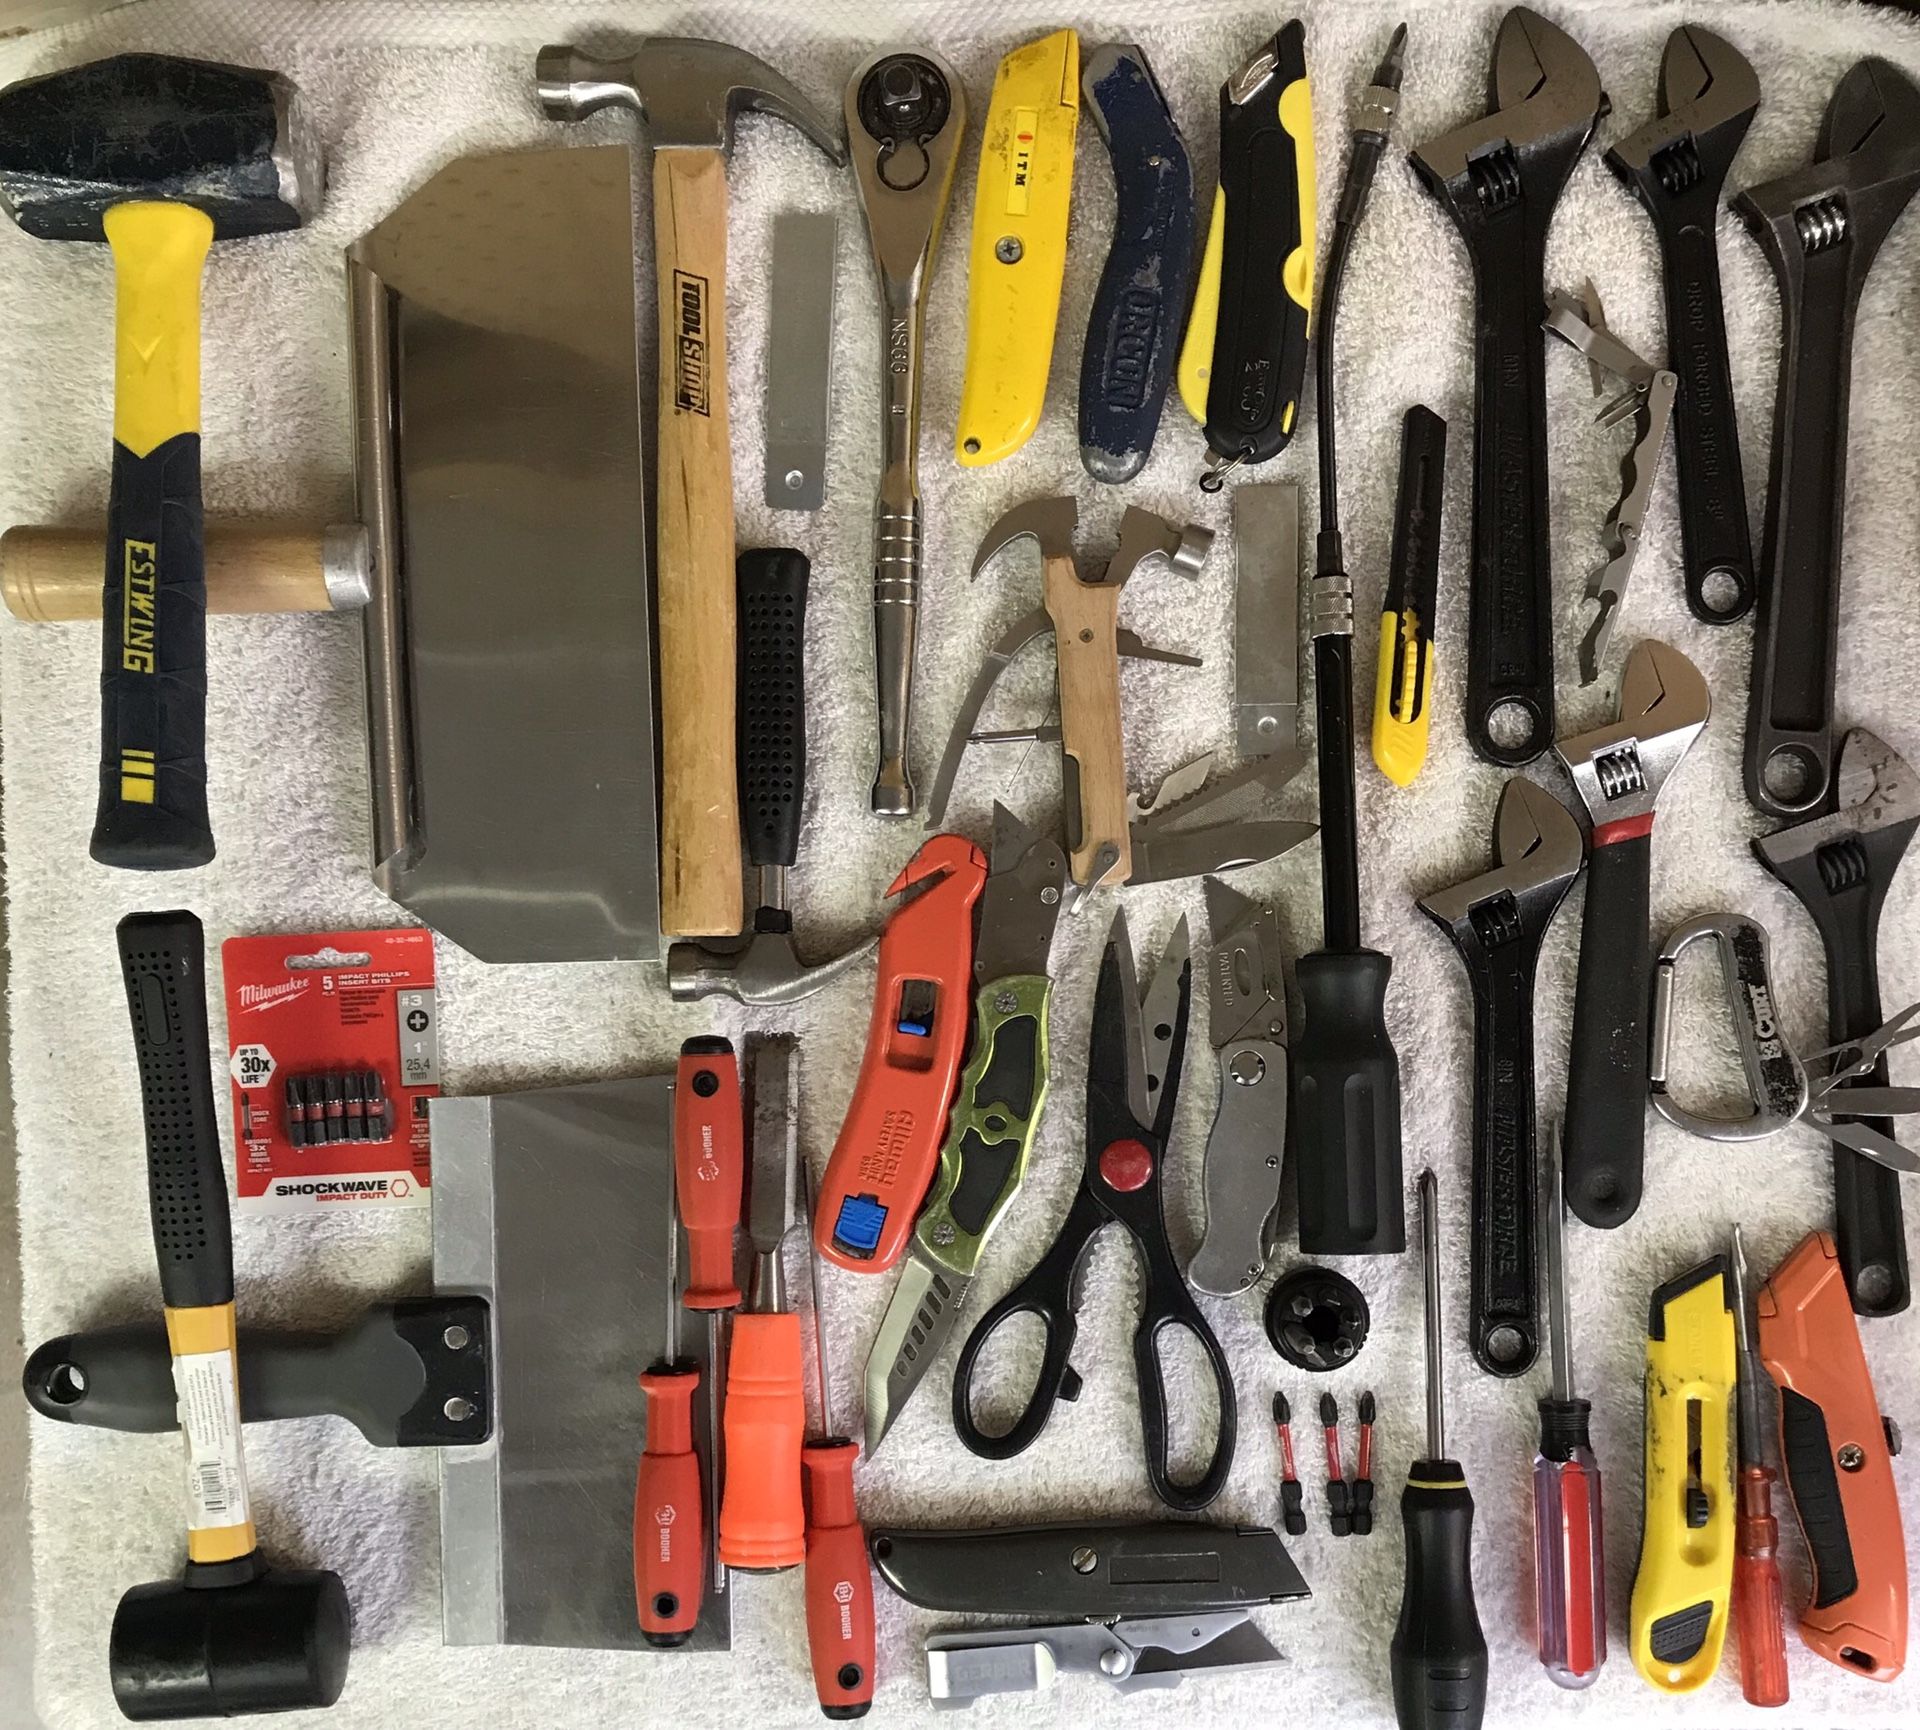 Drywall Knives! Sledgehammer! Mallet! Crescent Wrenches